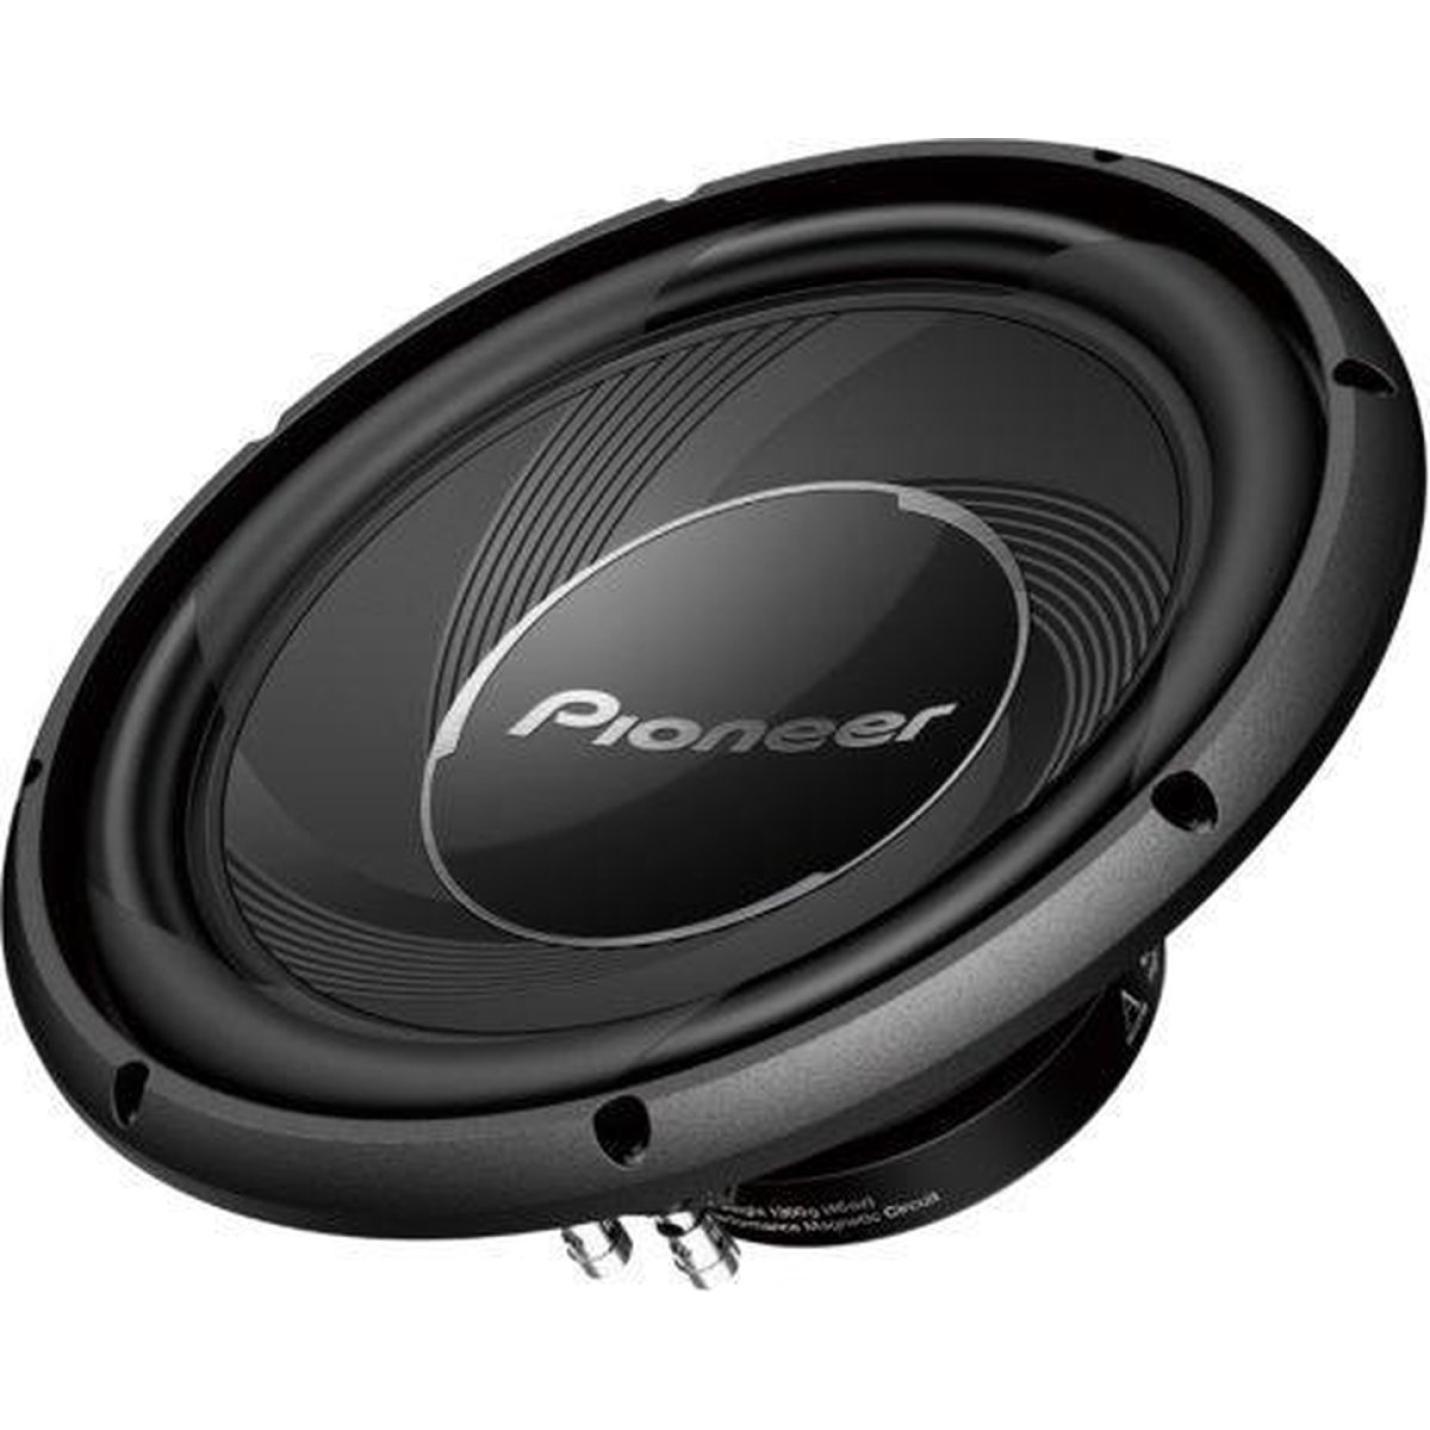 Pioneer TS-A300S4 auto-subwoofer - 30 cm 3